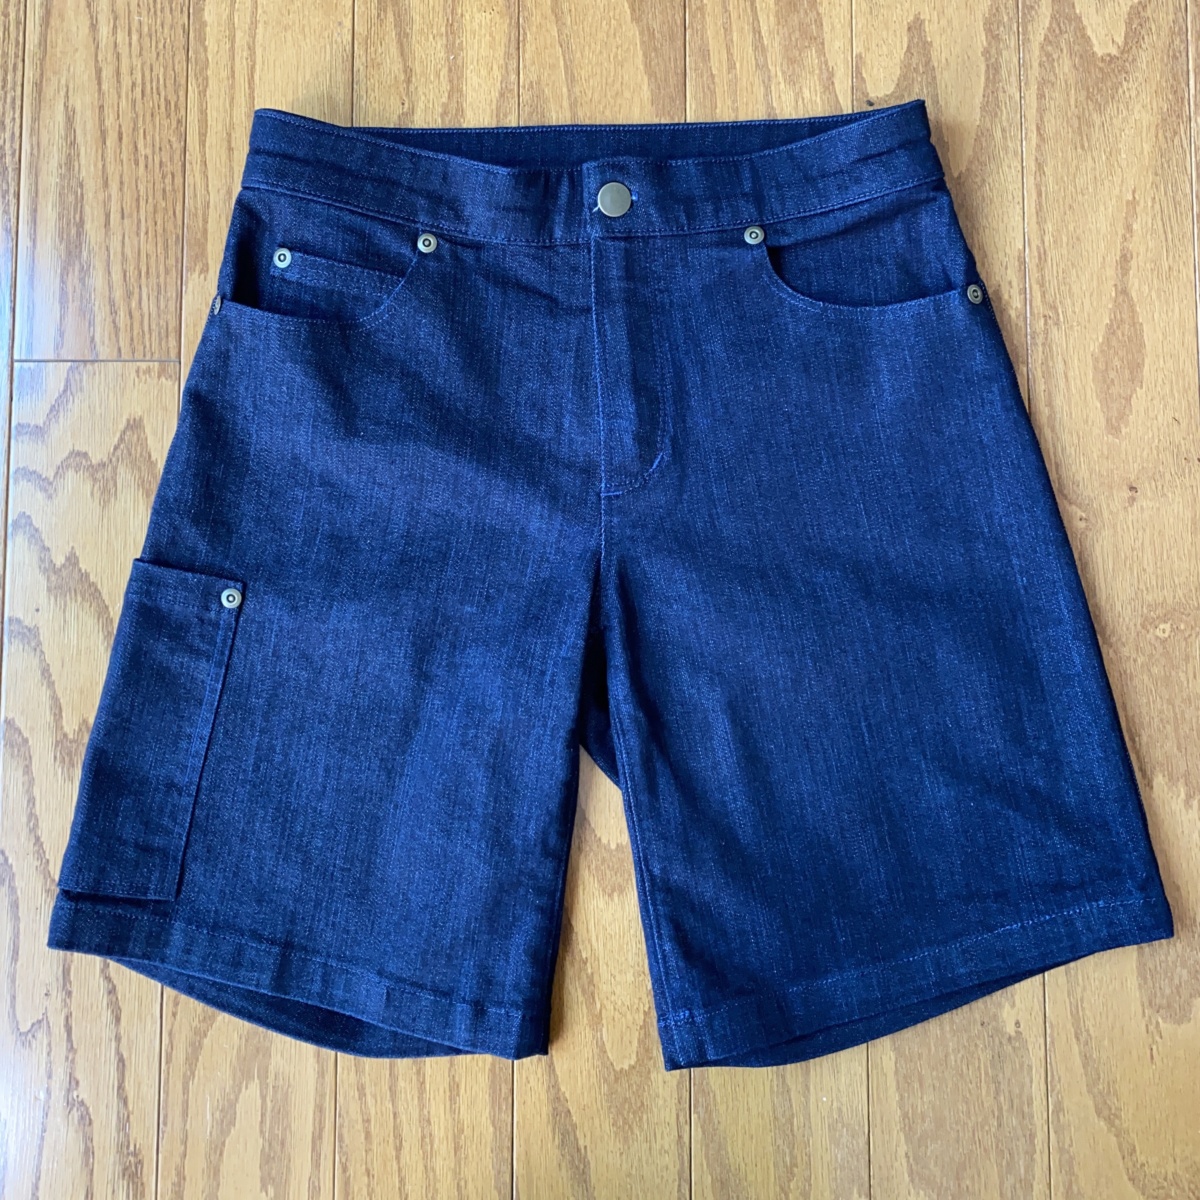 Shorts – but only because I had to